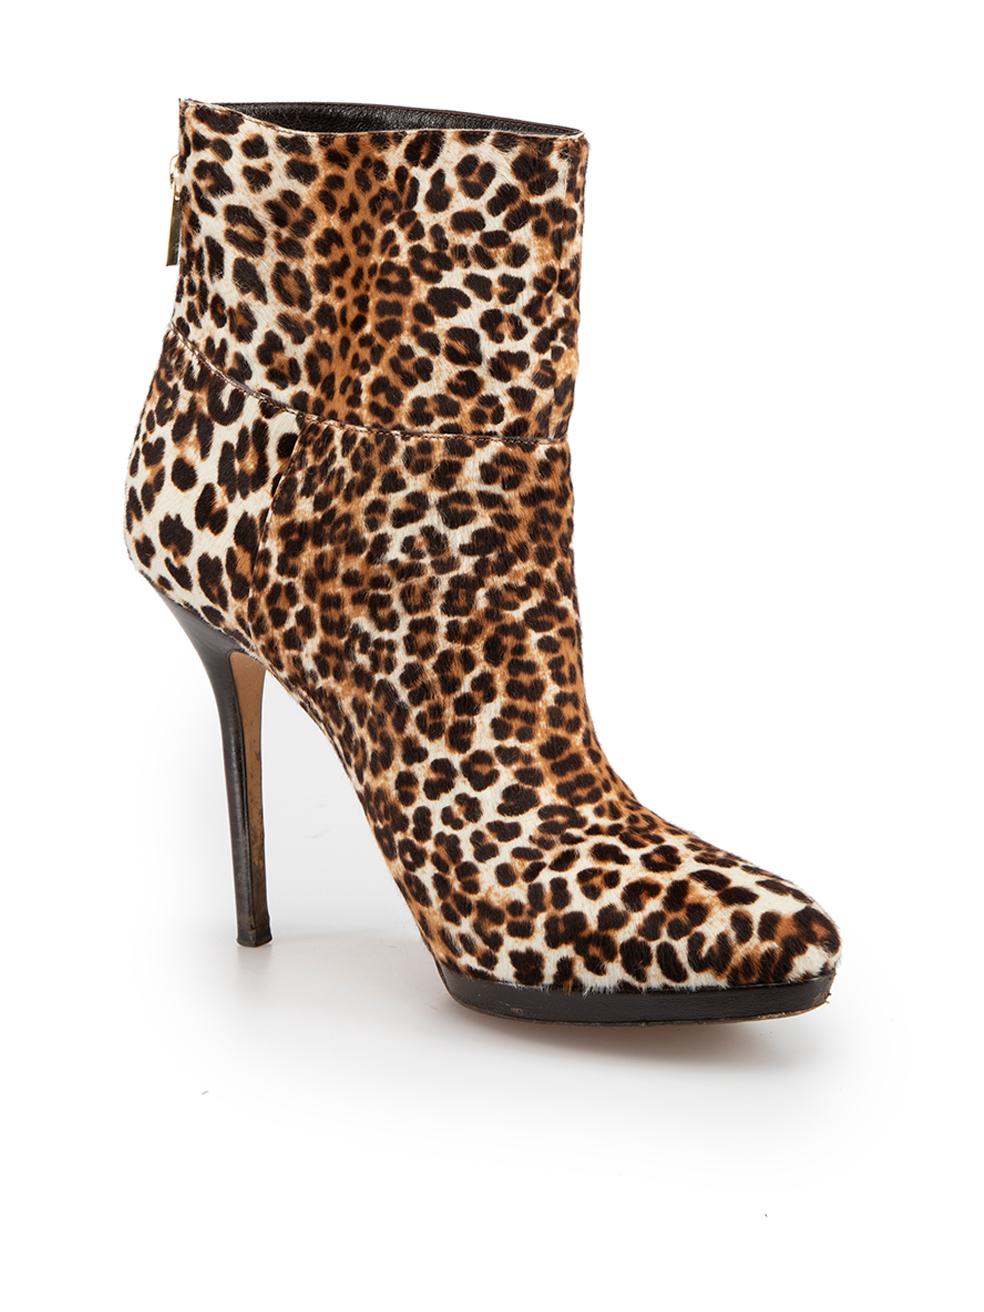 CONDITION is Good. Minor wear to boots is evident. Moderate wear to soles can be seen with noticeable scuff marking on this used Jimmy Choo designer resale item.



Details


Brown

Leopard print

Pony-style calfskin

High heel

Ankle boots

Pointed